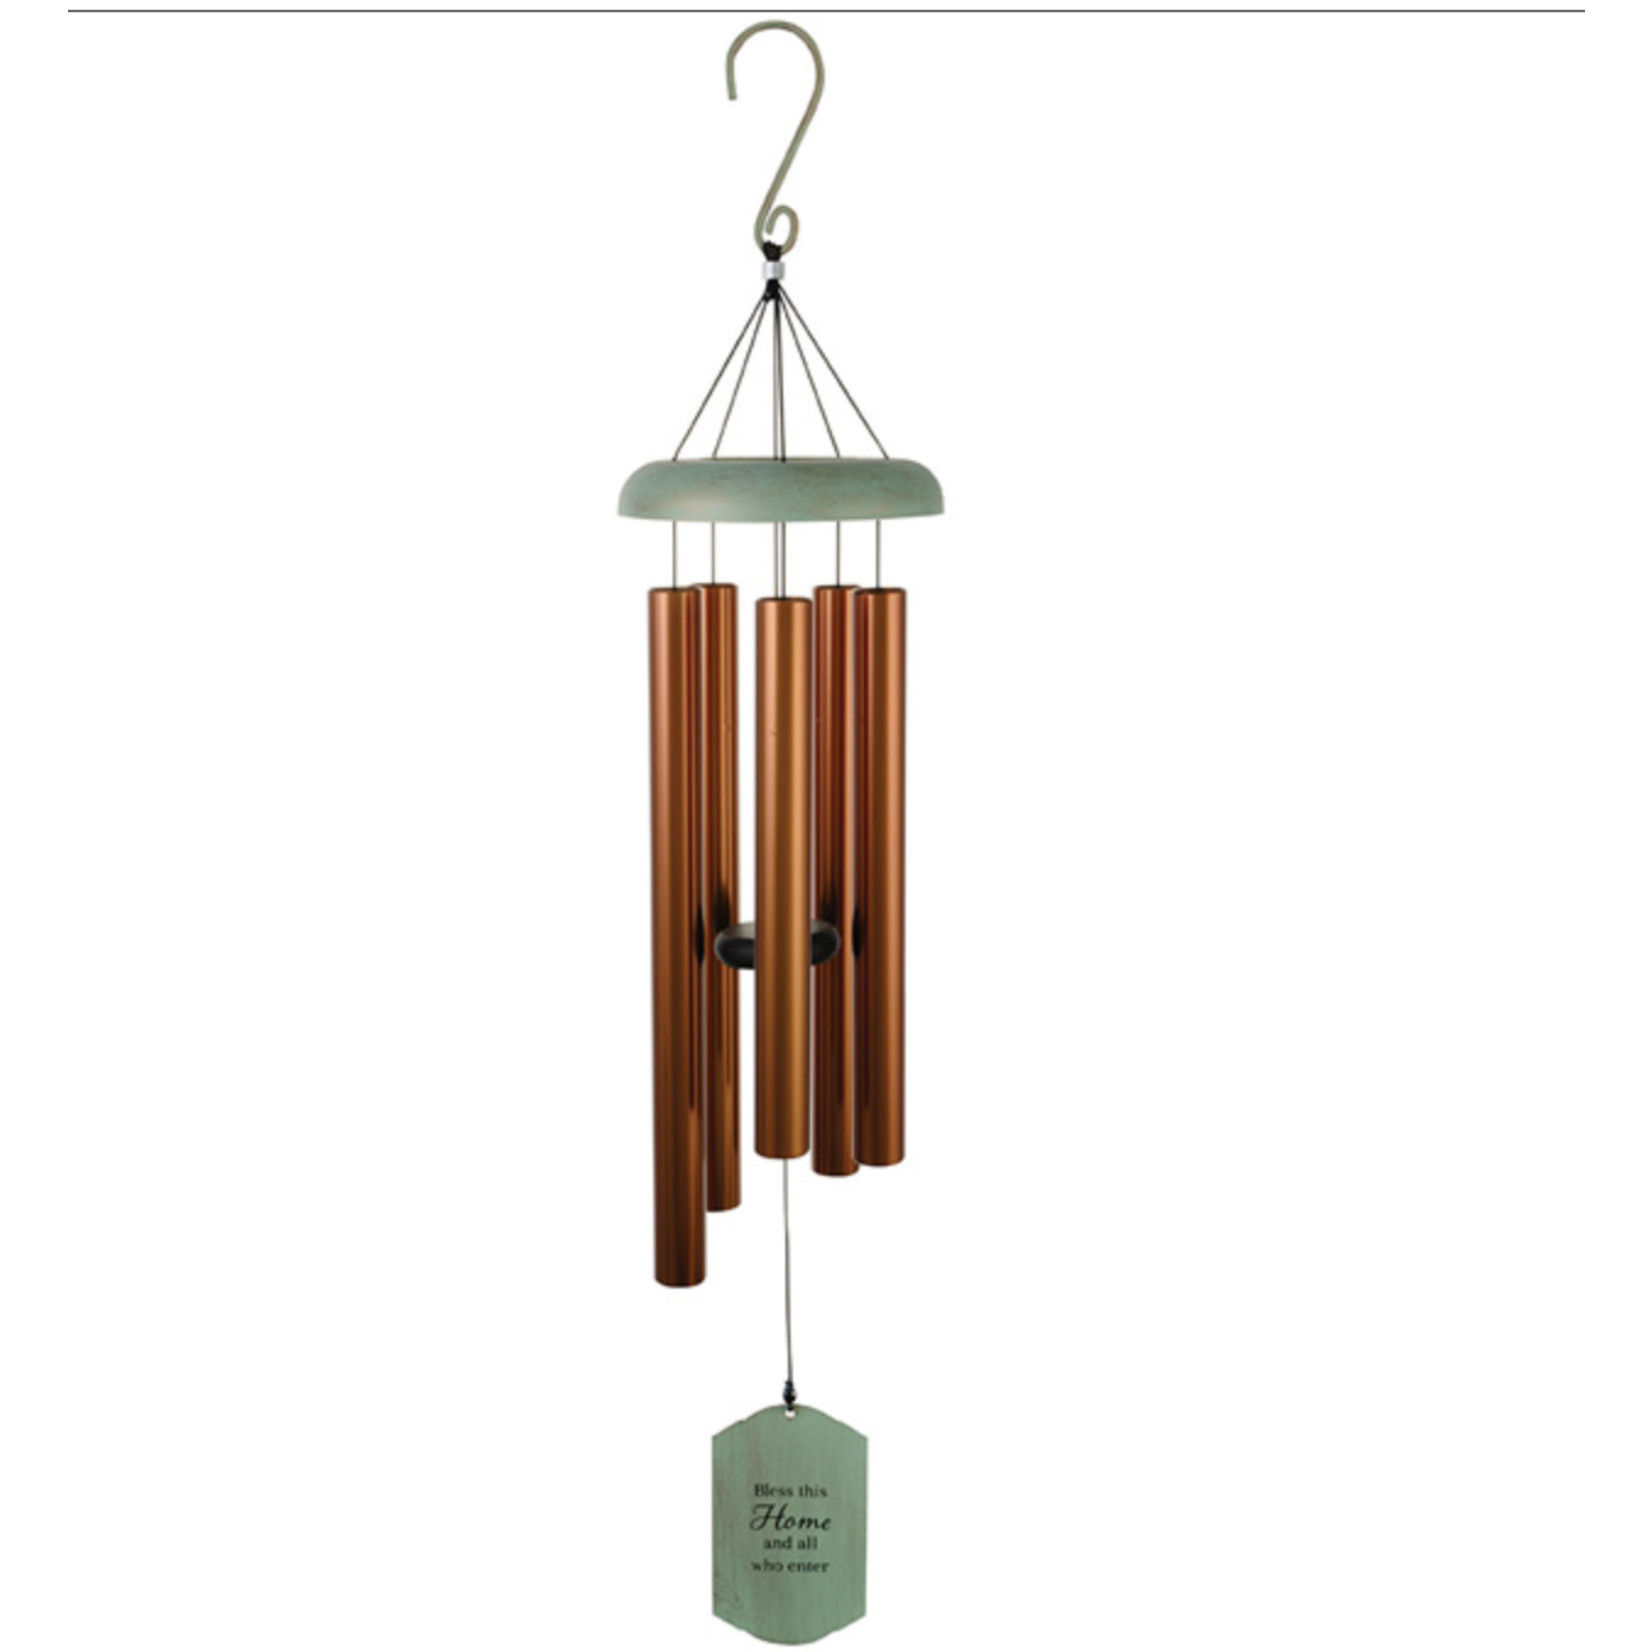 “Bless This Home” 38” Patina Sentiment Chime